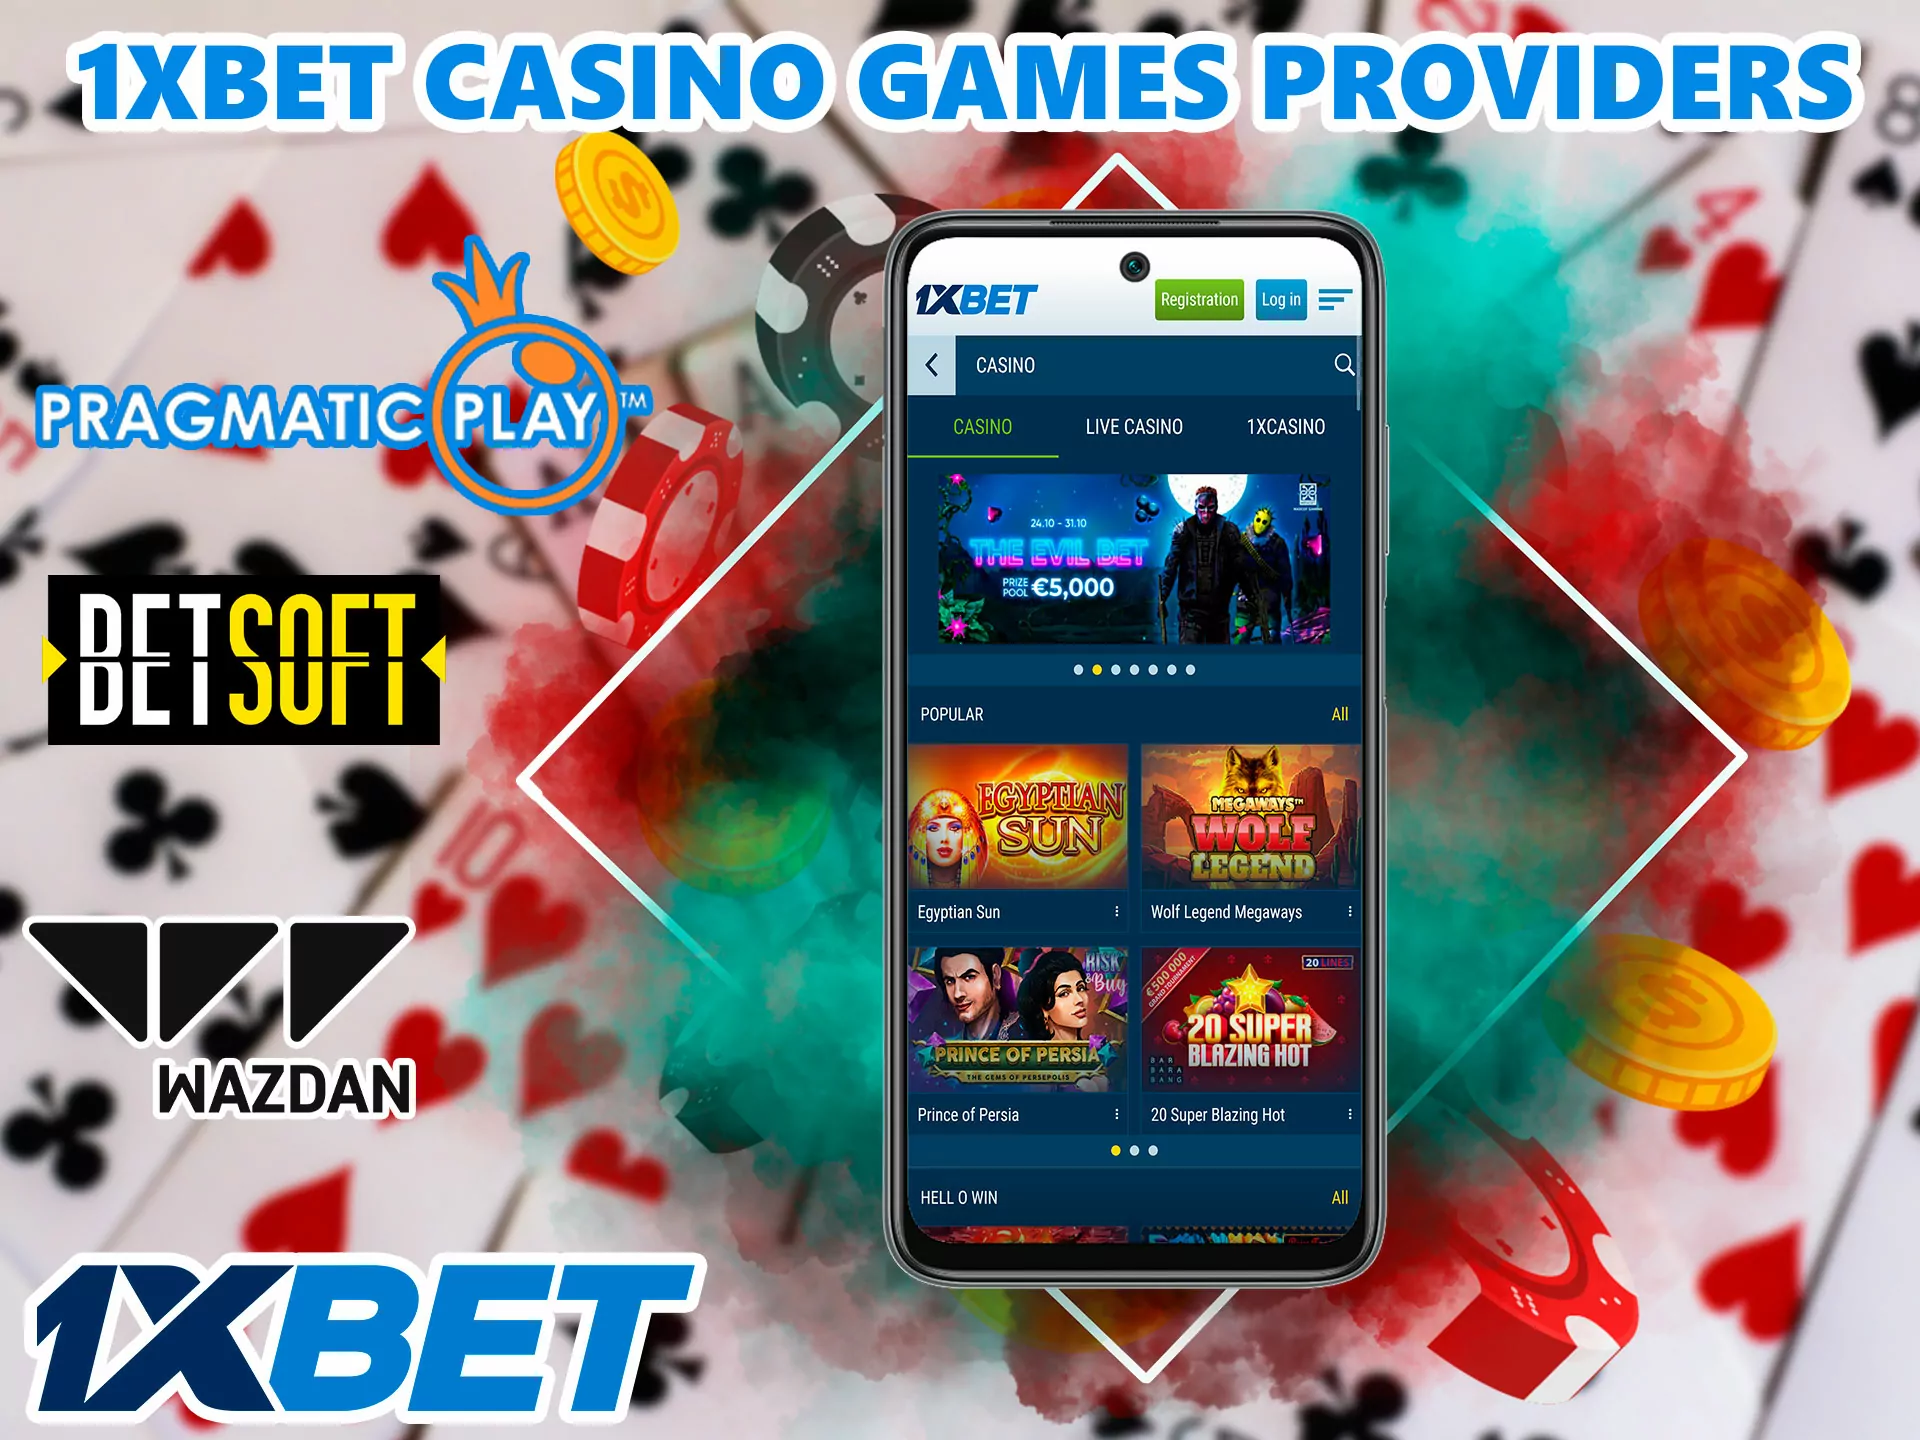 More than 50 providers, they have rich experience in the casino software market, they are chosen only by large gambling sites, this article provides a complete list of who players choose most often.